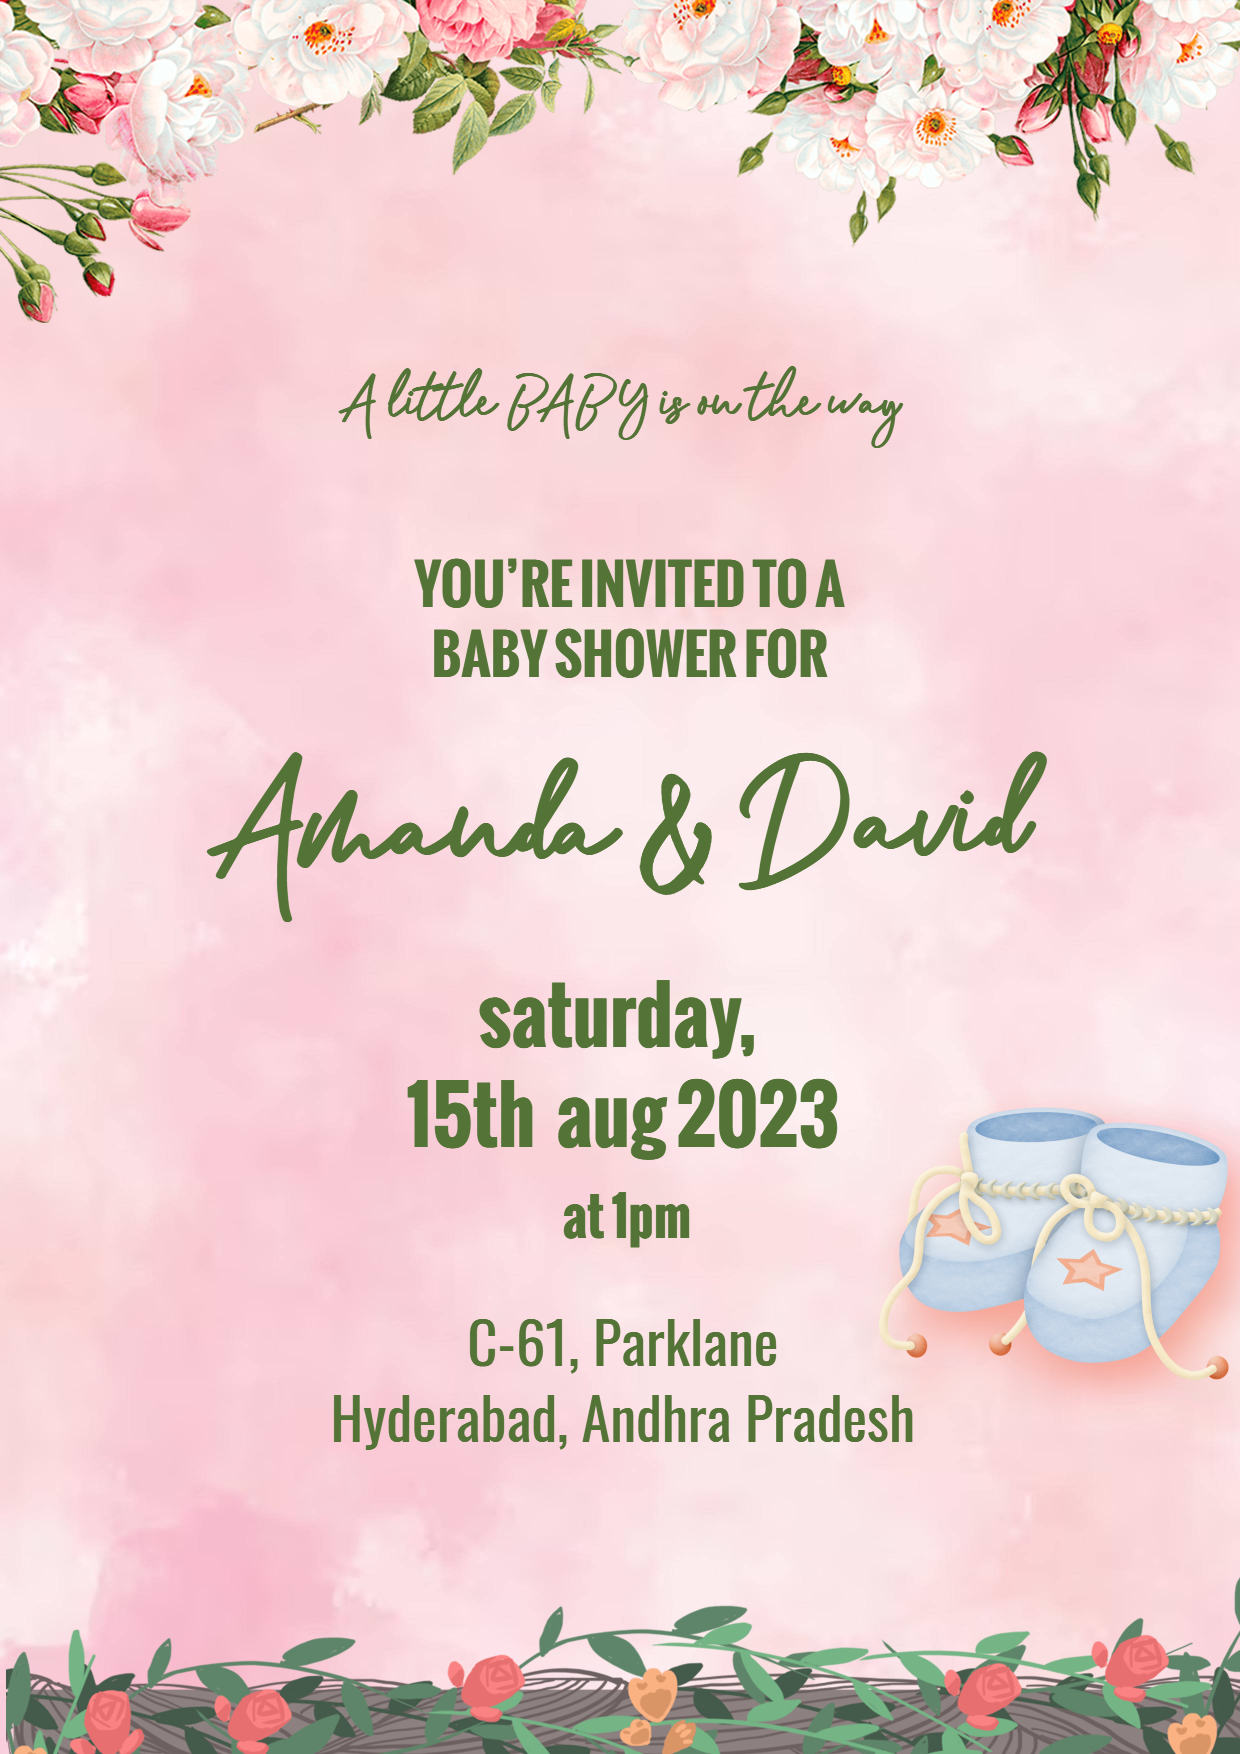 Upcoming Baby Shower Invitation Template